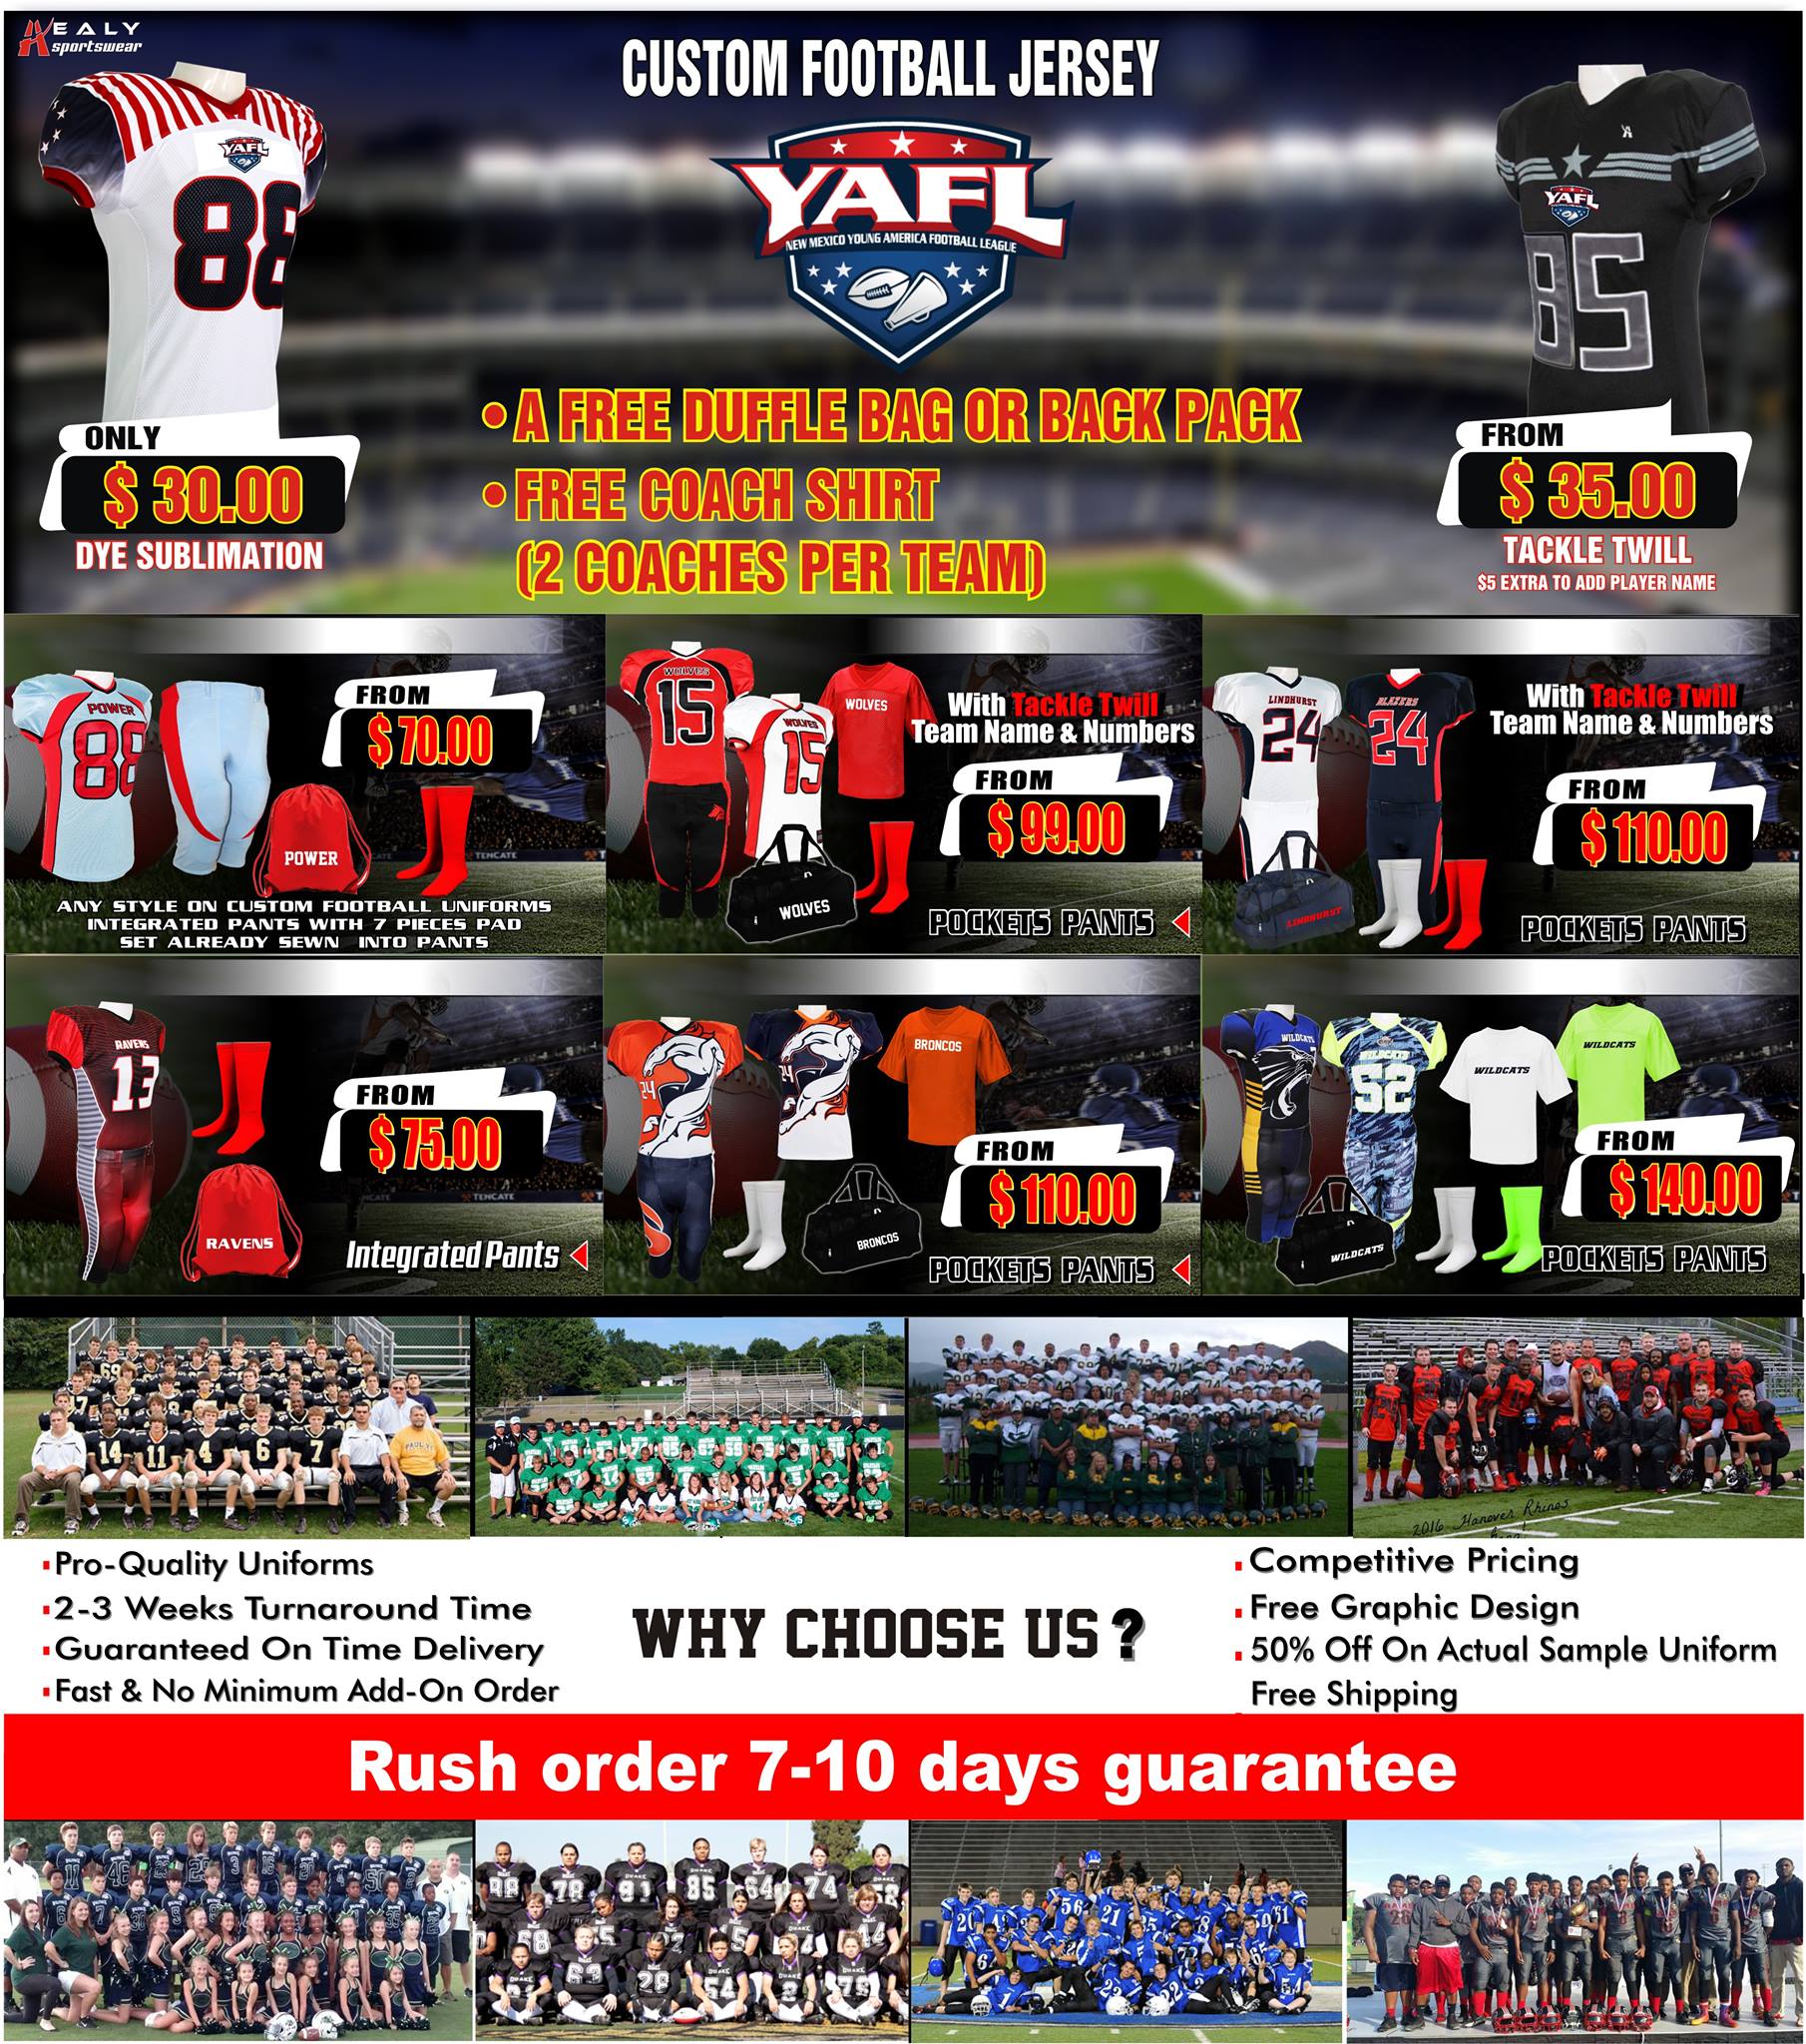 Imperial Point  Custom Sublimated Sports Uniforms & Jerseys